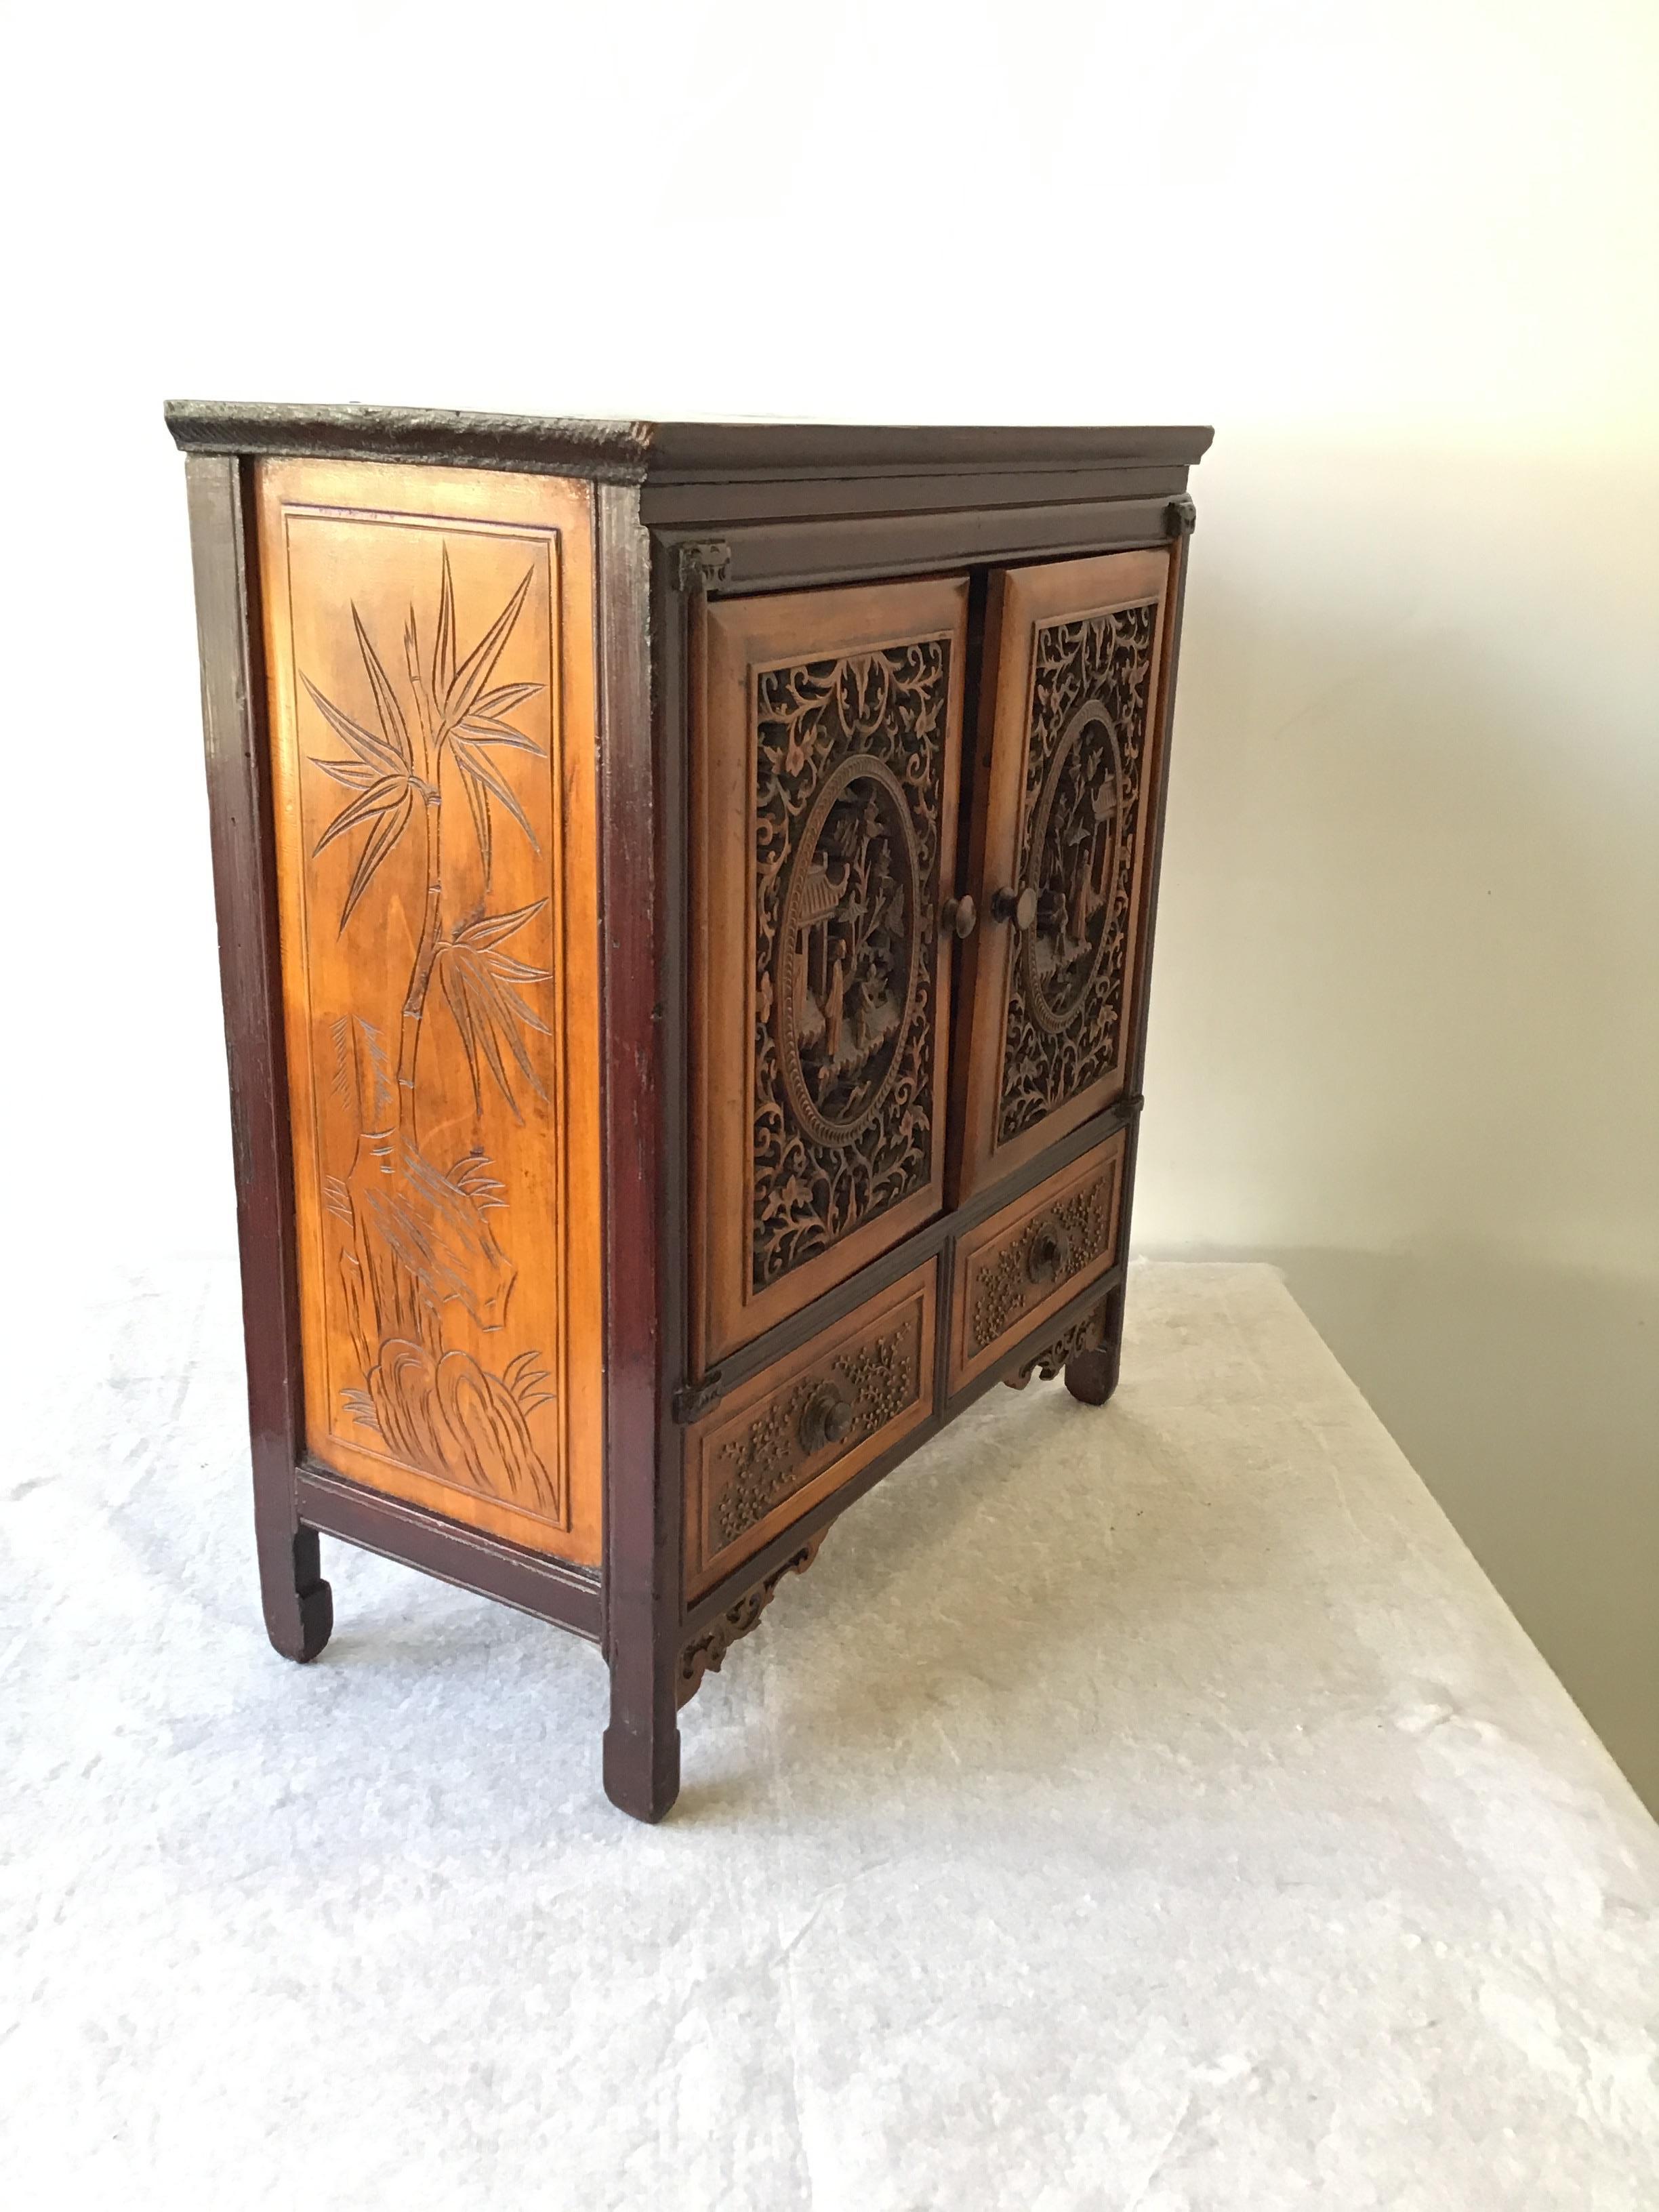 1880s Asian carved wood box with drawers.